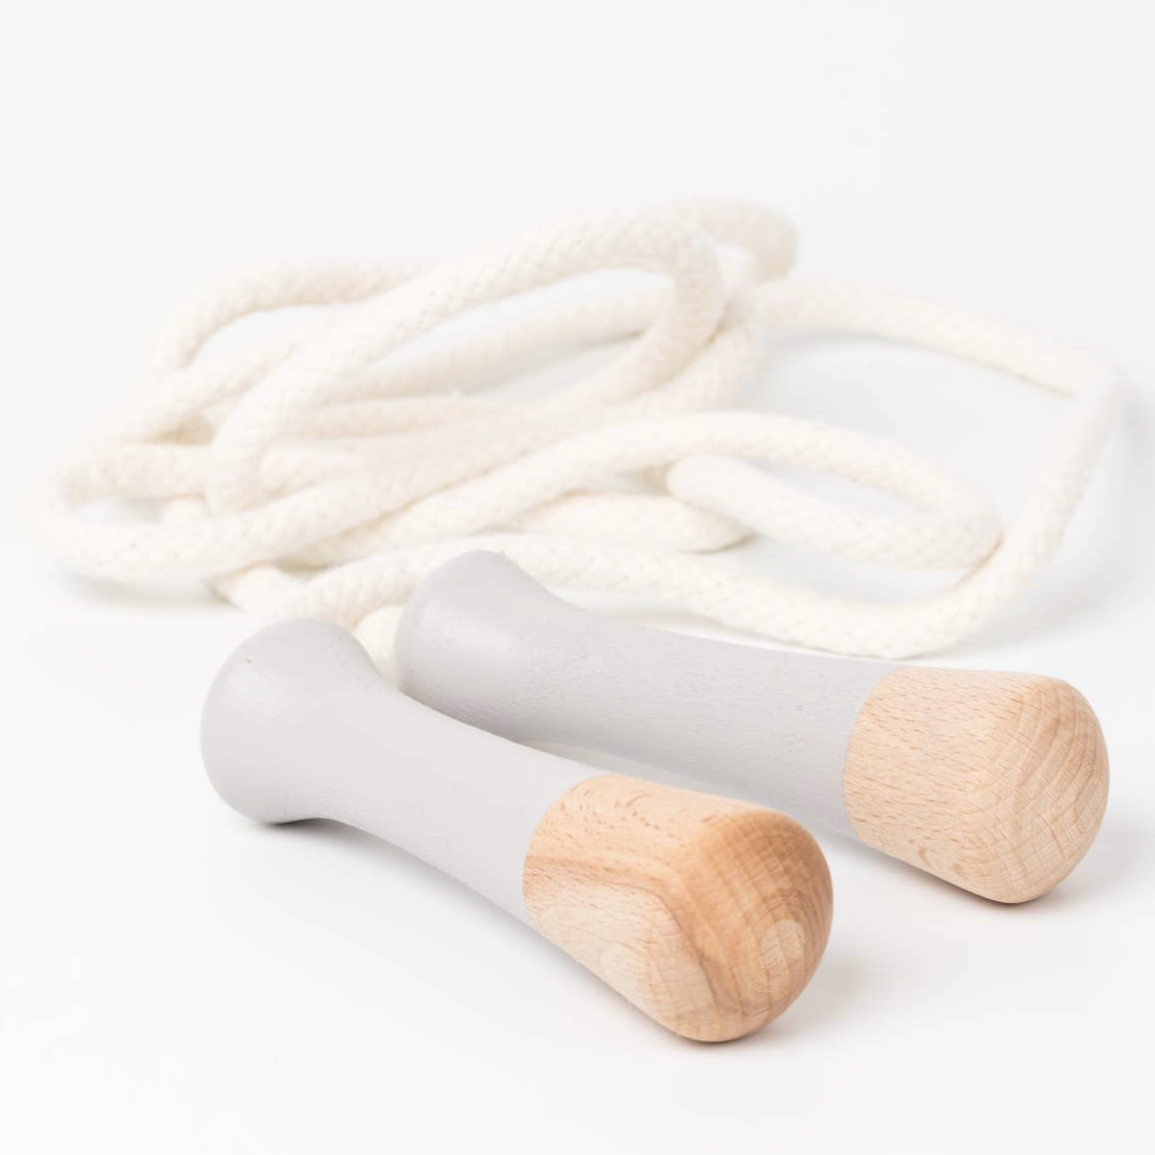 WOODEN SKIPPING ROPE - GREY